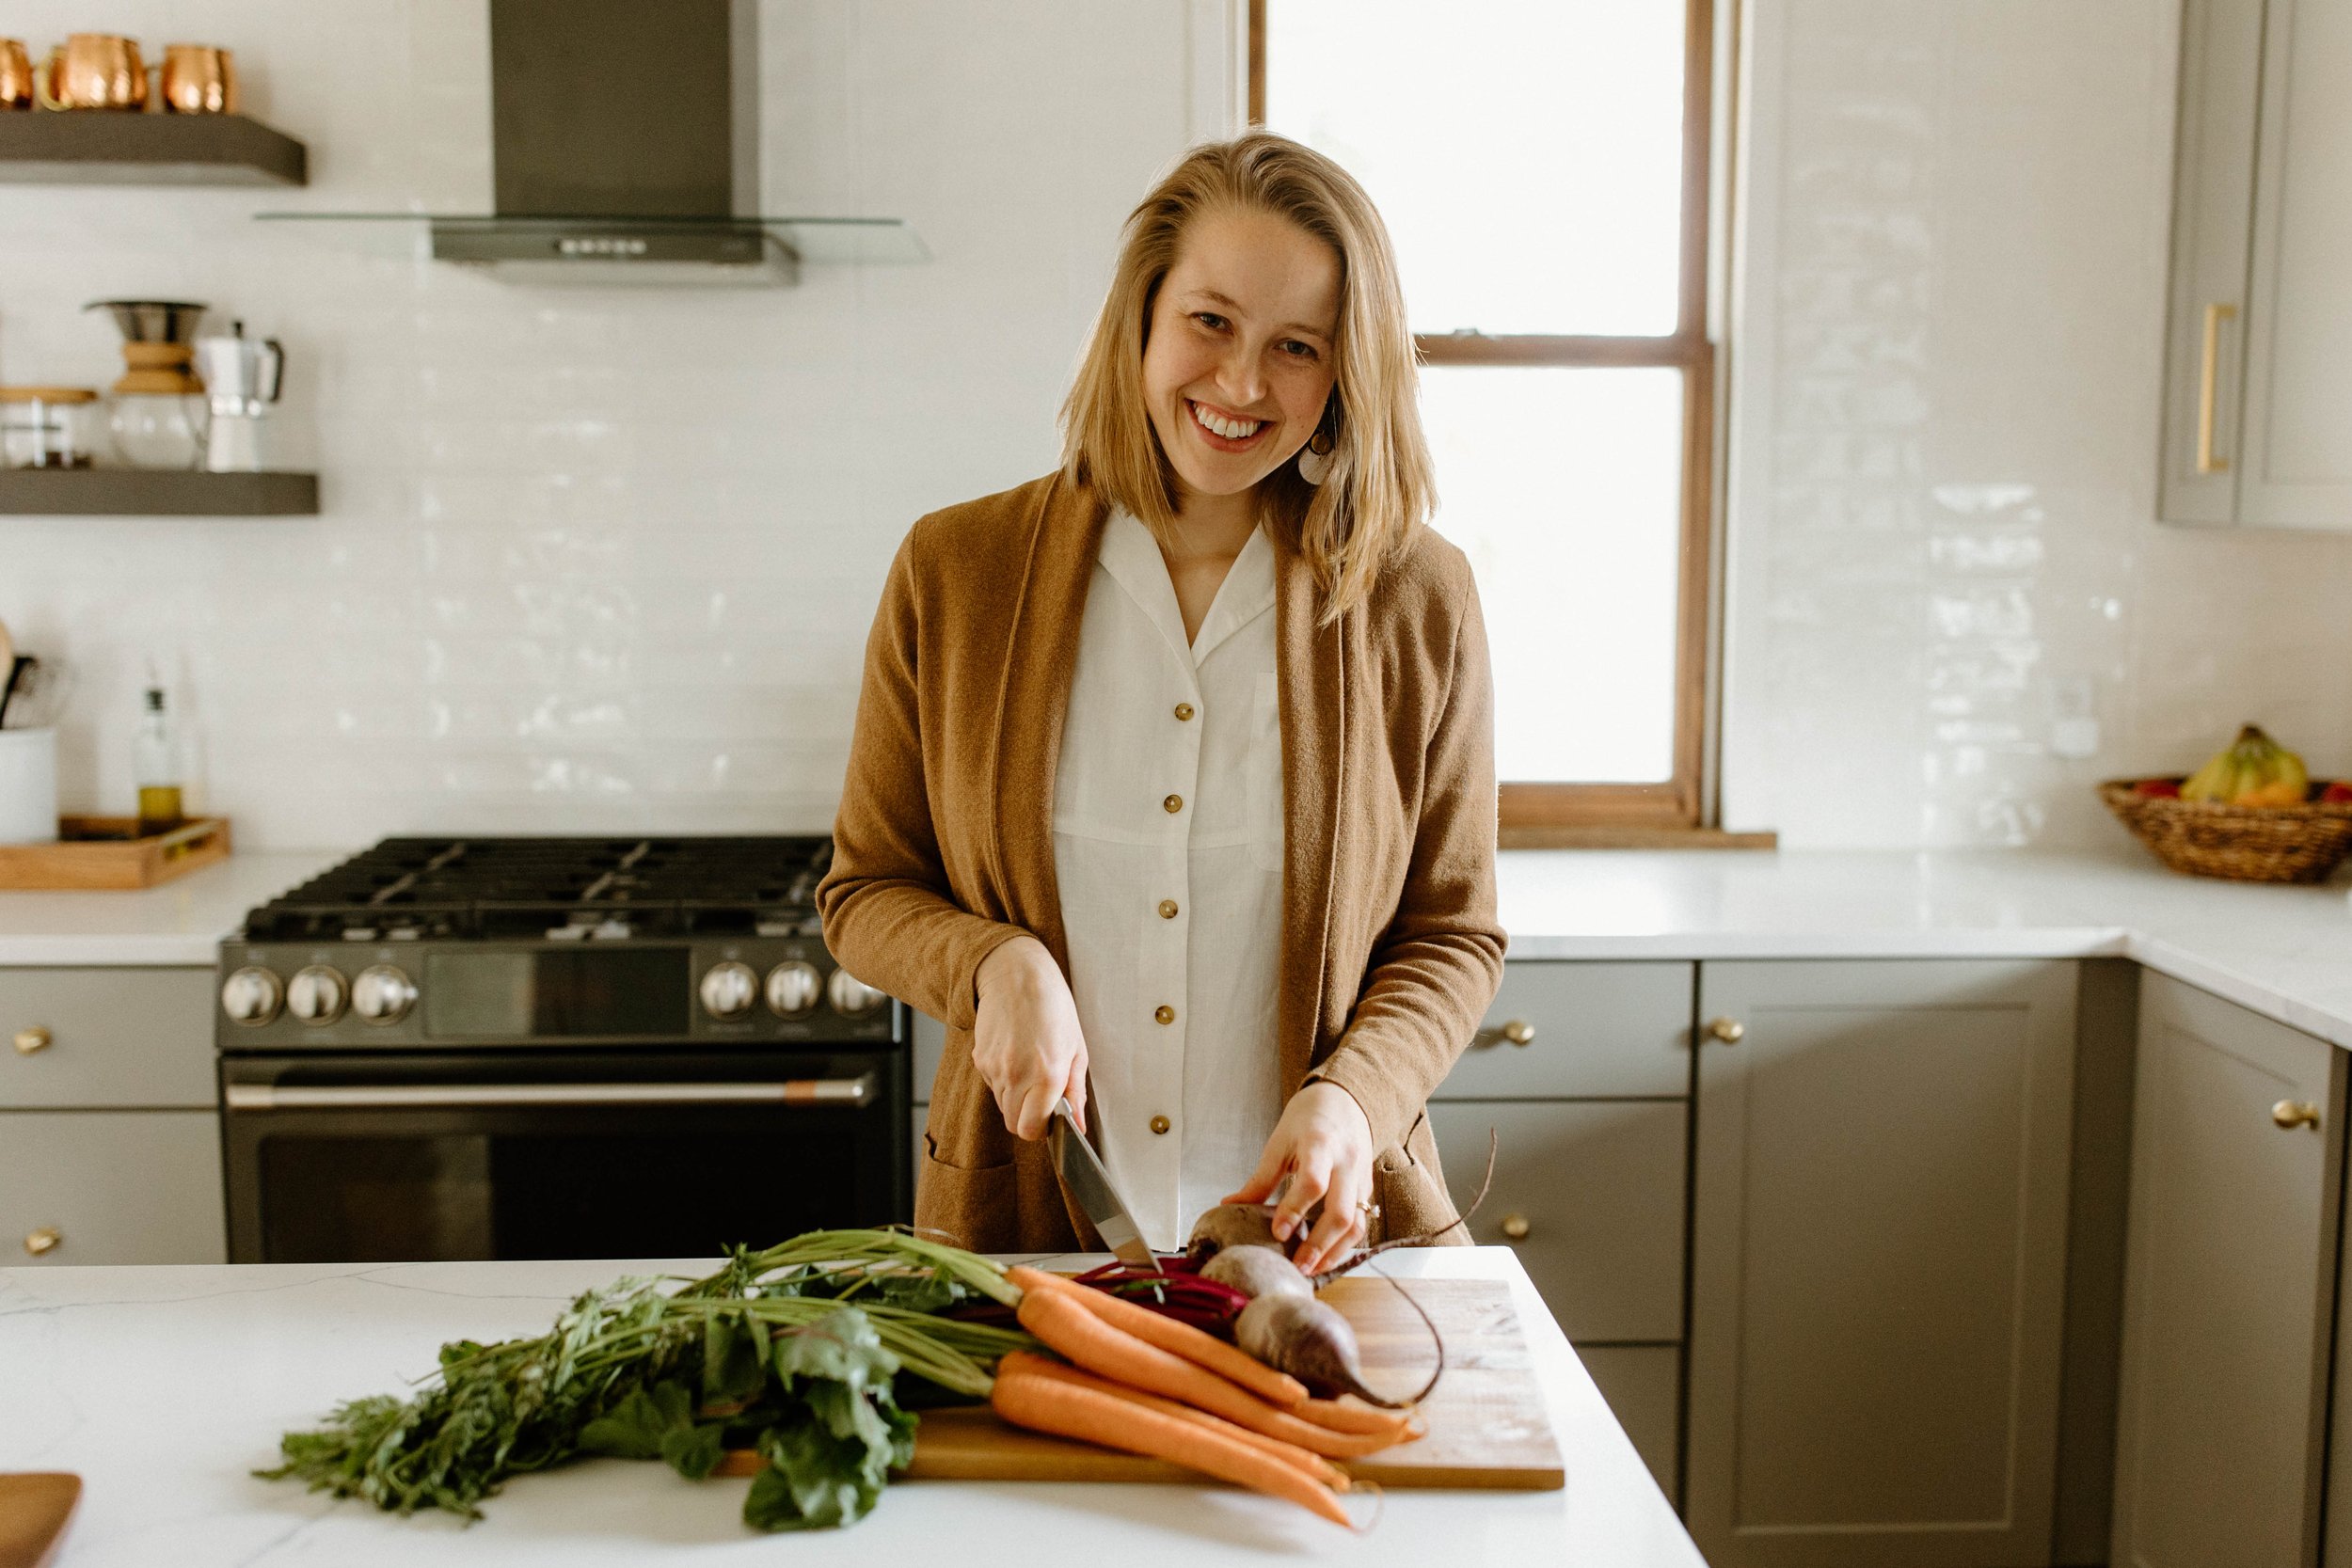 Classes — The Planted Dietitian